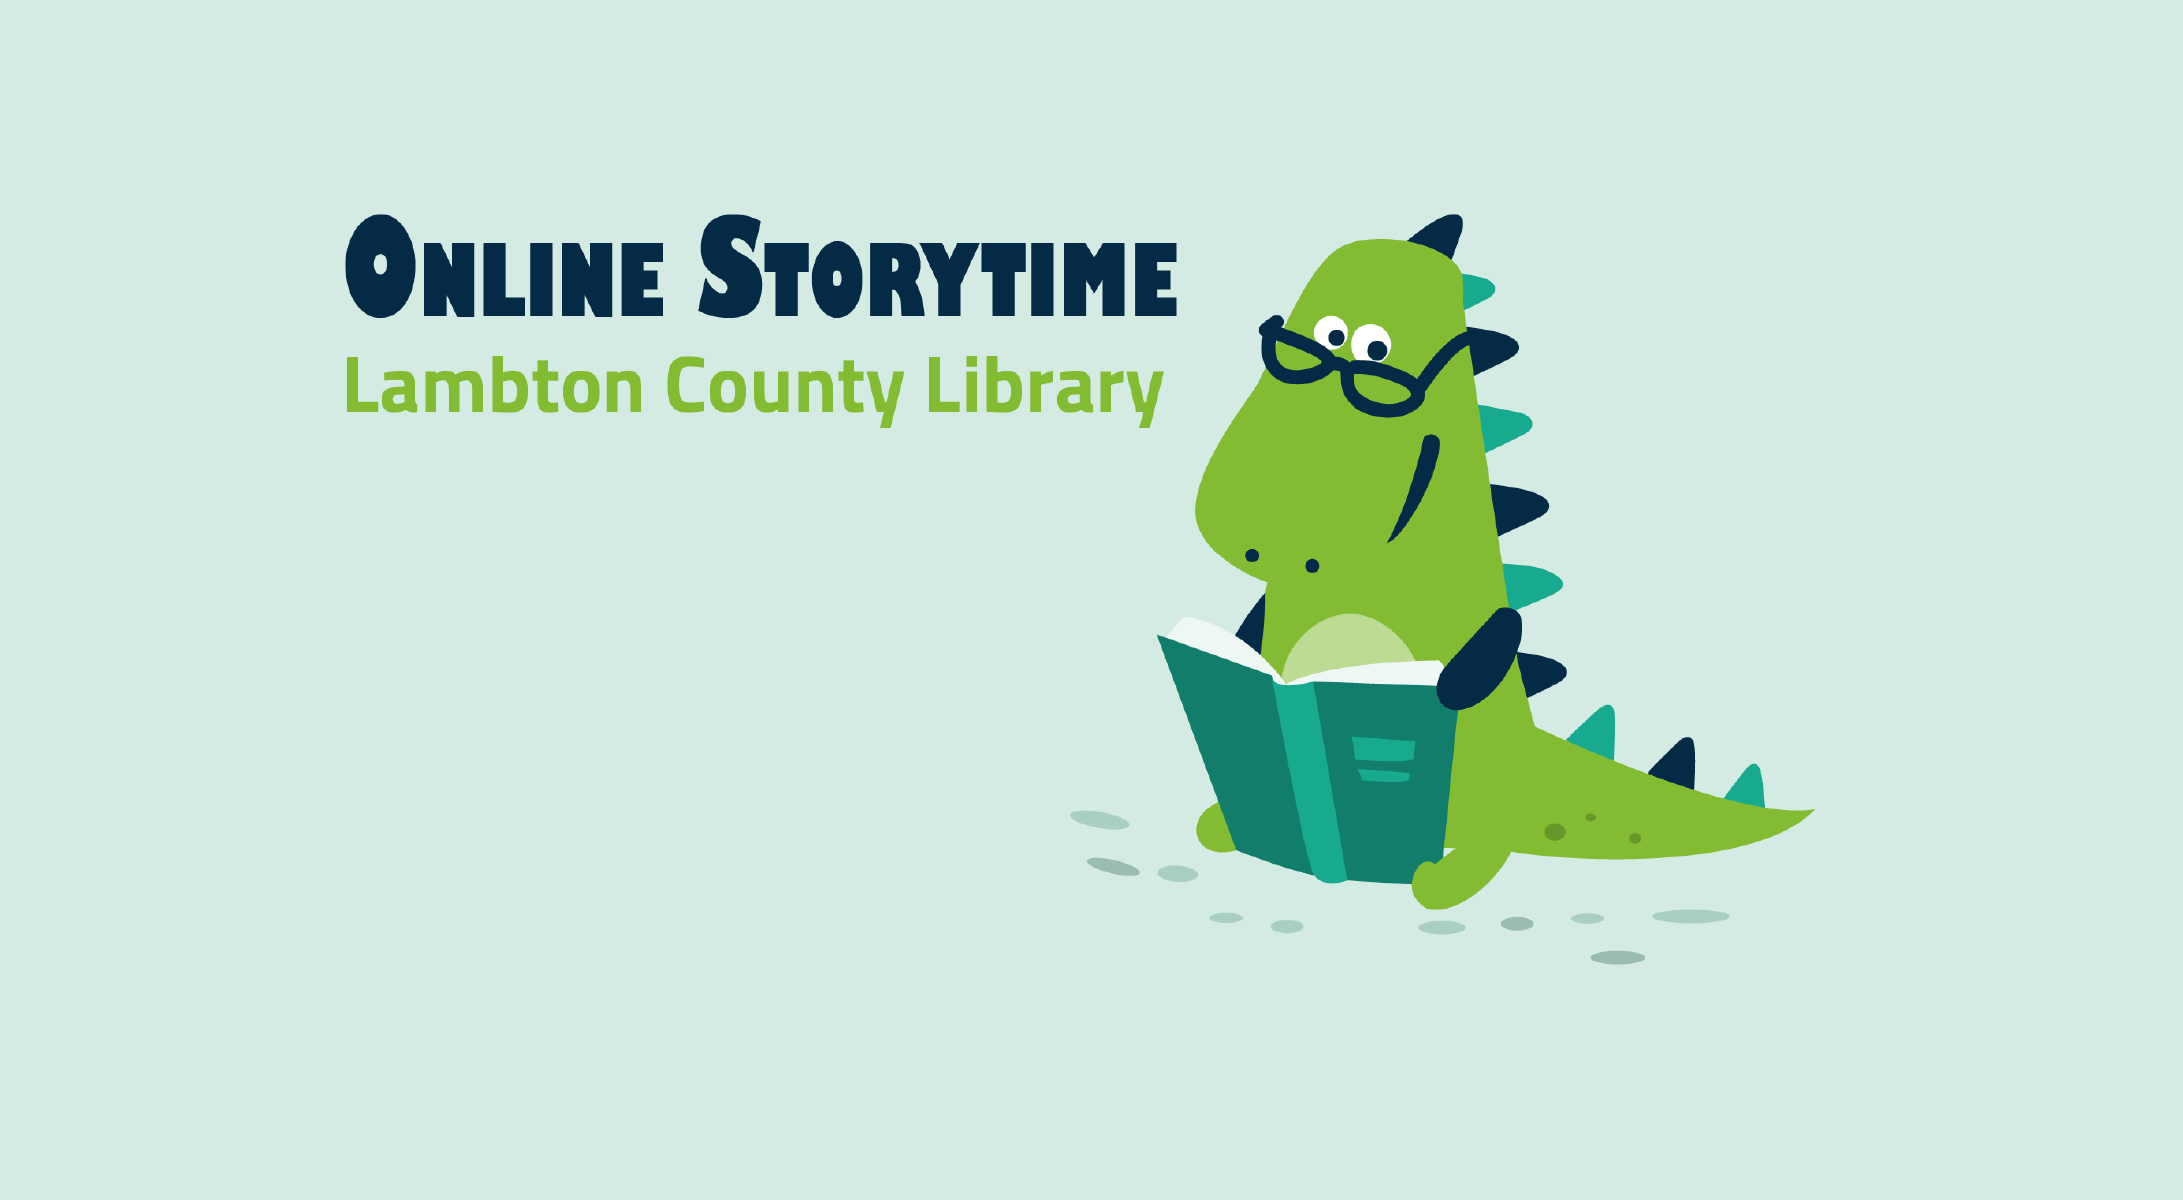 Dinosaur cartoon with text that says "Online Storytimes"